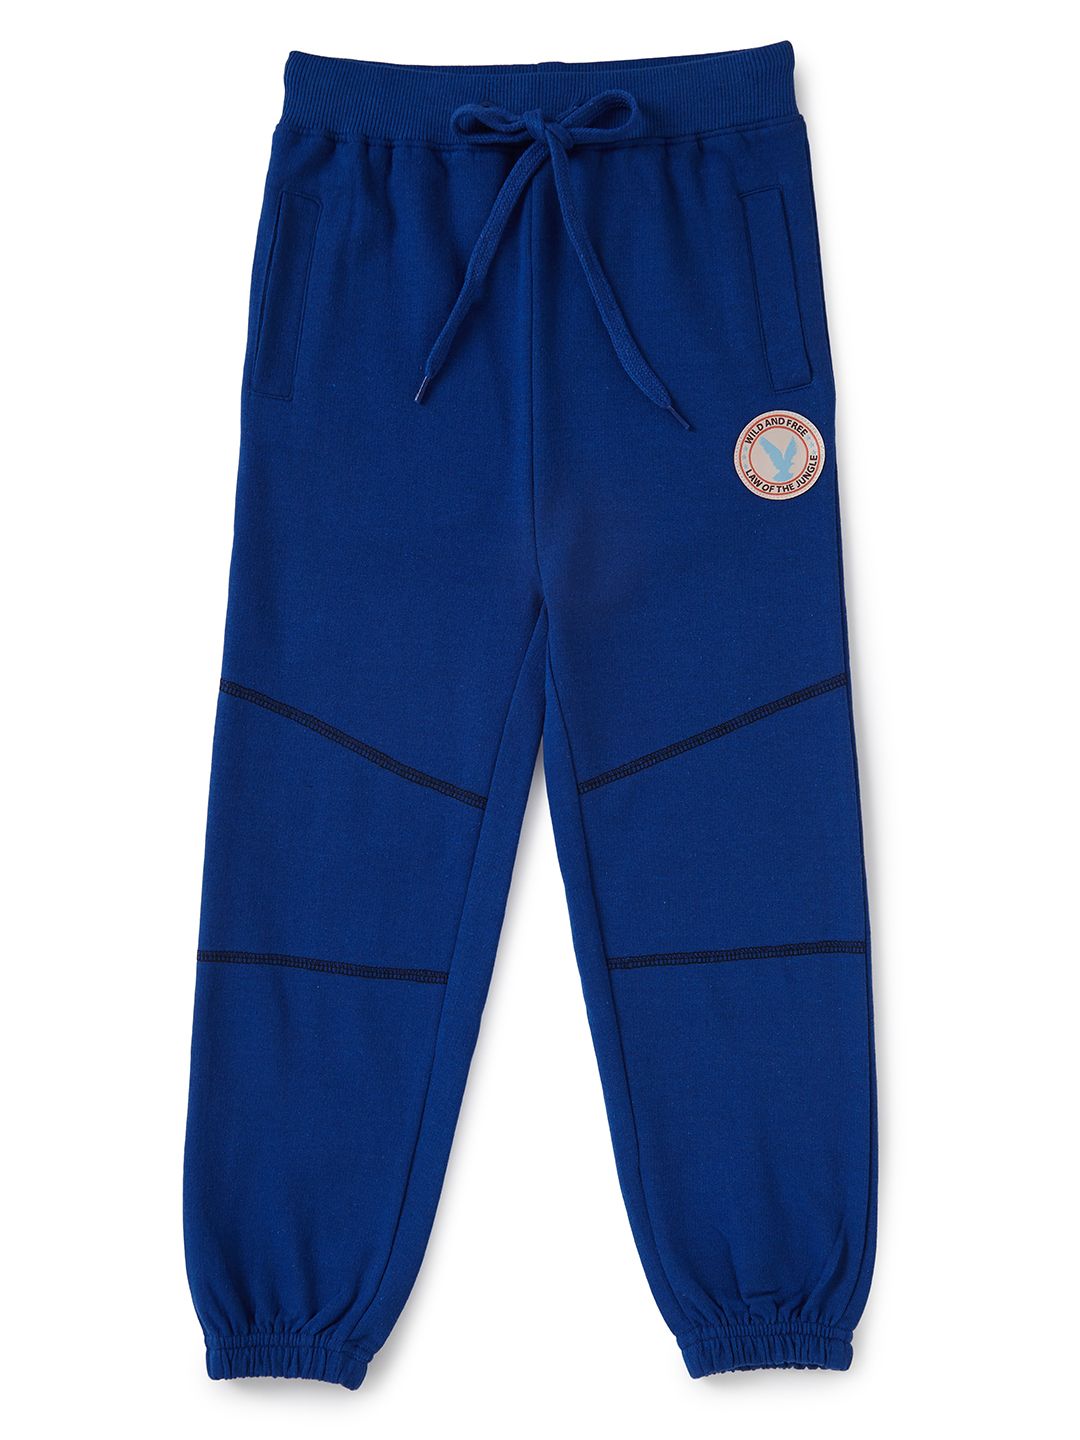 Boys Cotton Track Pant (Blue , 4-12 years)